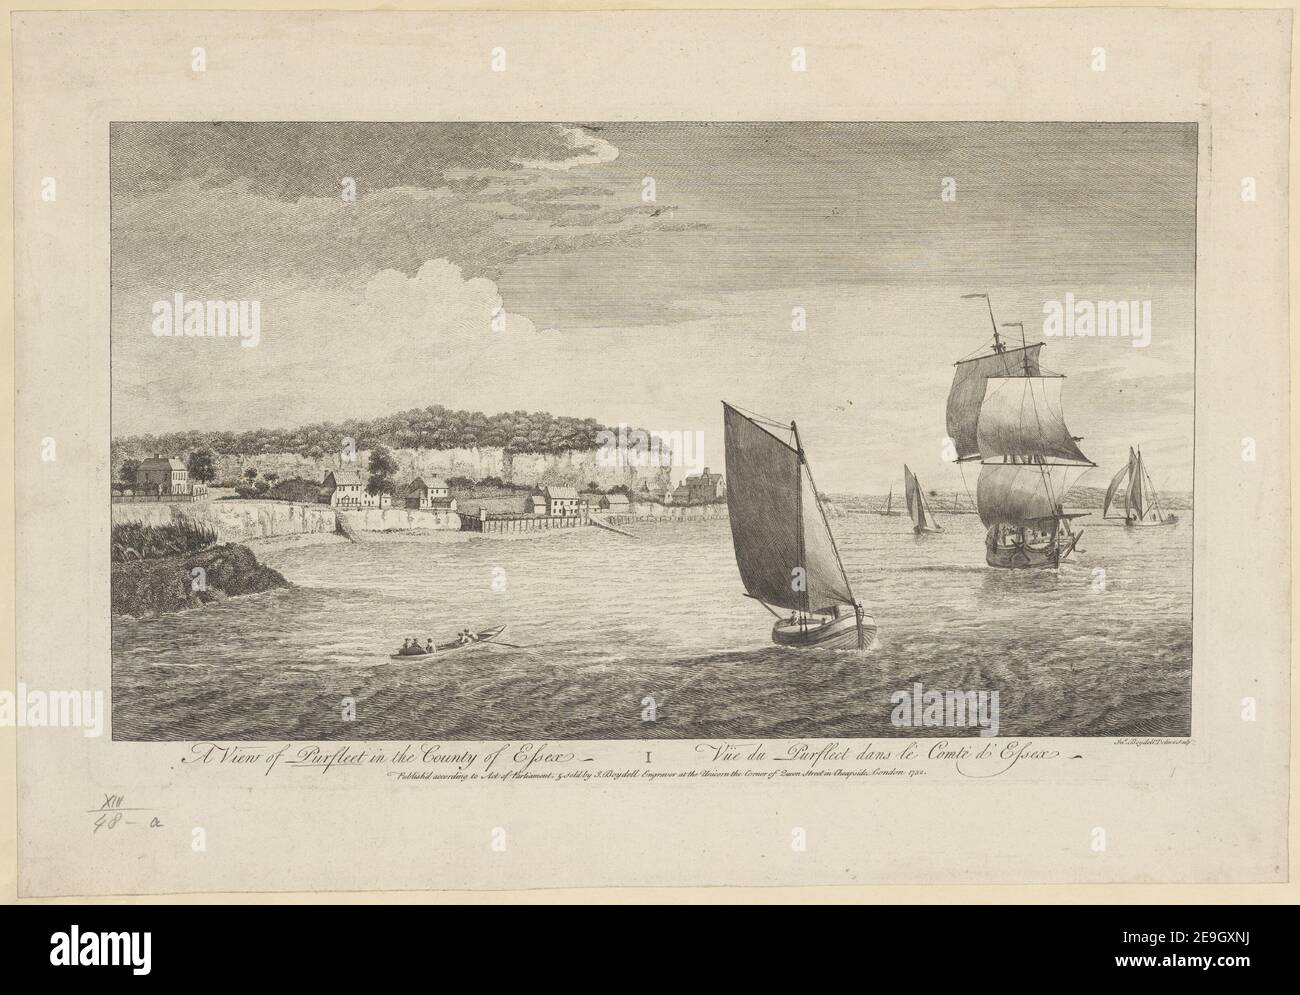 A View of Purfleet in the County of Essex = VuÃàe du Purfleet dans le ComteÃÅ d'Essex.  Author  Boydell, John 13.48.a. Place of publication: [London] Publisher: Publish'd according to Act of Parliament, , Sold by J. Boydell Engraver at the Unicorn the Corner of Queen Street in Cheapside, London, Date of publication: 1752.  Item type: 1 print Medium: etching Dimensions: platemark 25.4 x 44.2 cm.  Former owner: George III, King of Great Britain, 1738-1820 Stock Photo